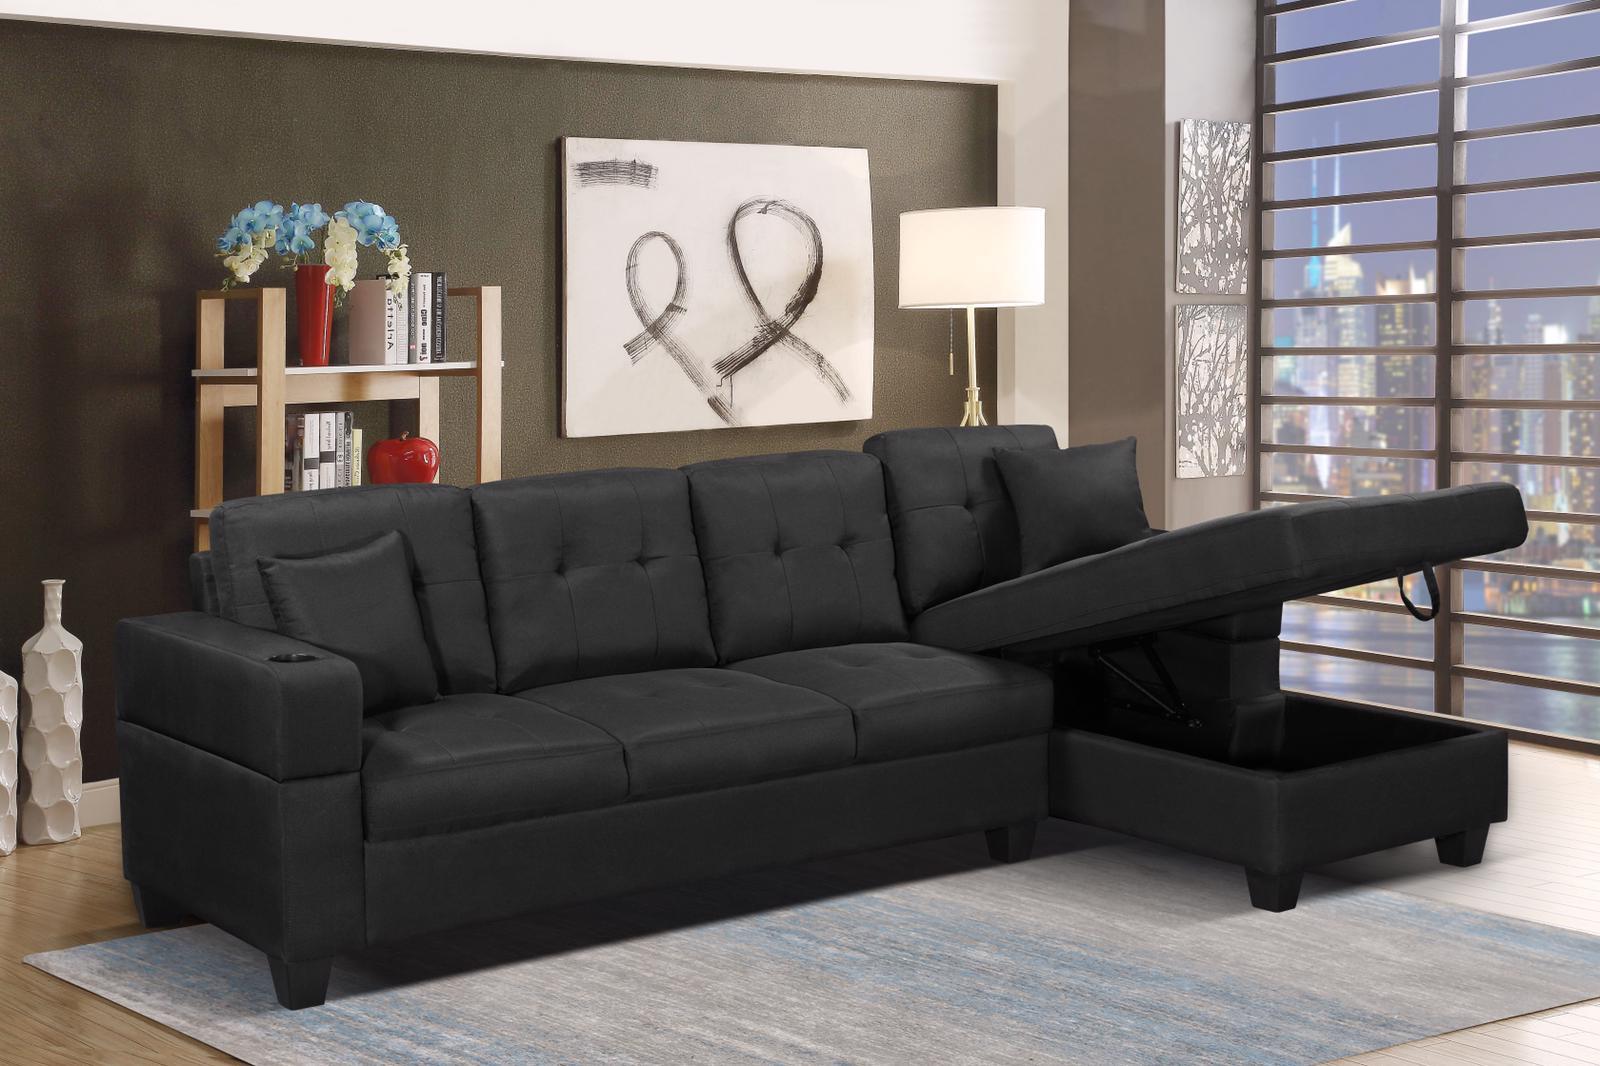 Fabric Sectional Sofa With Storage